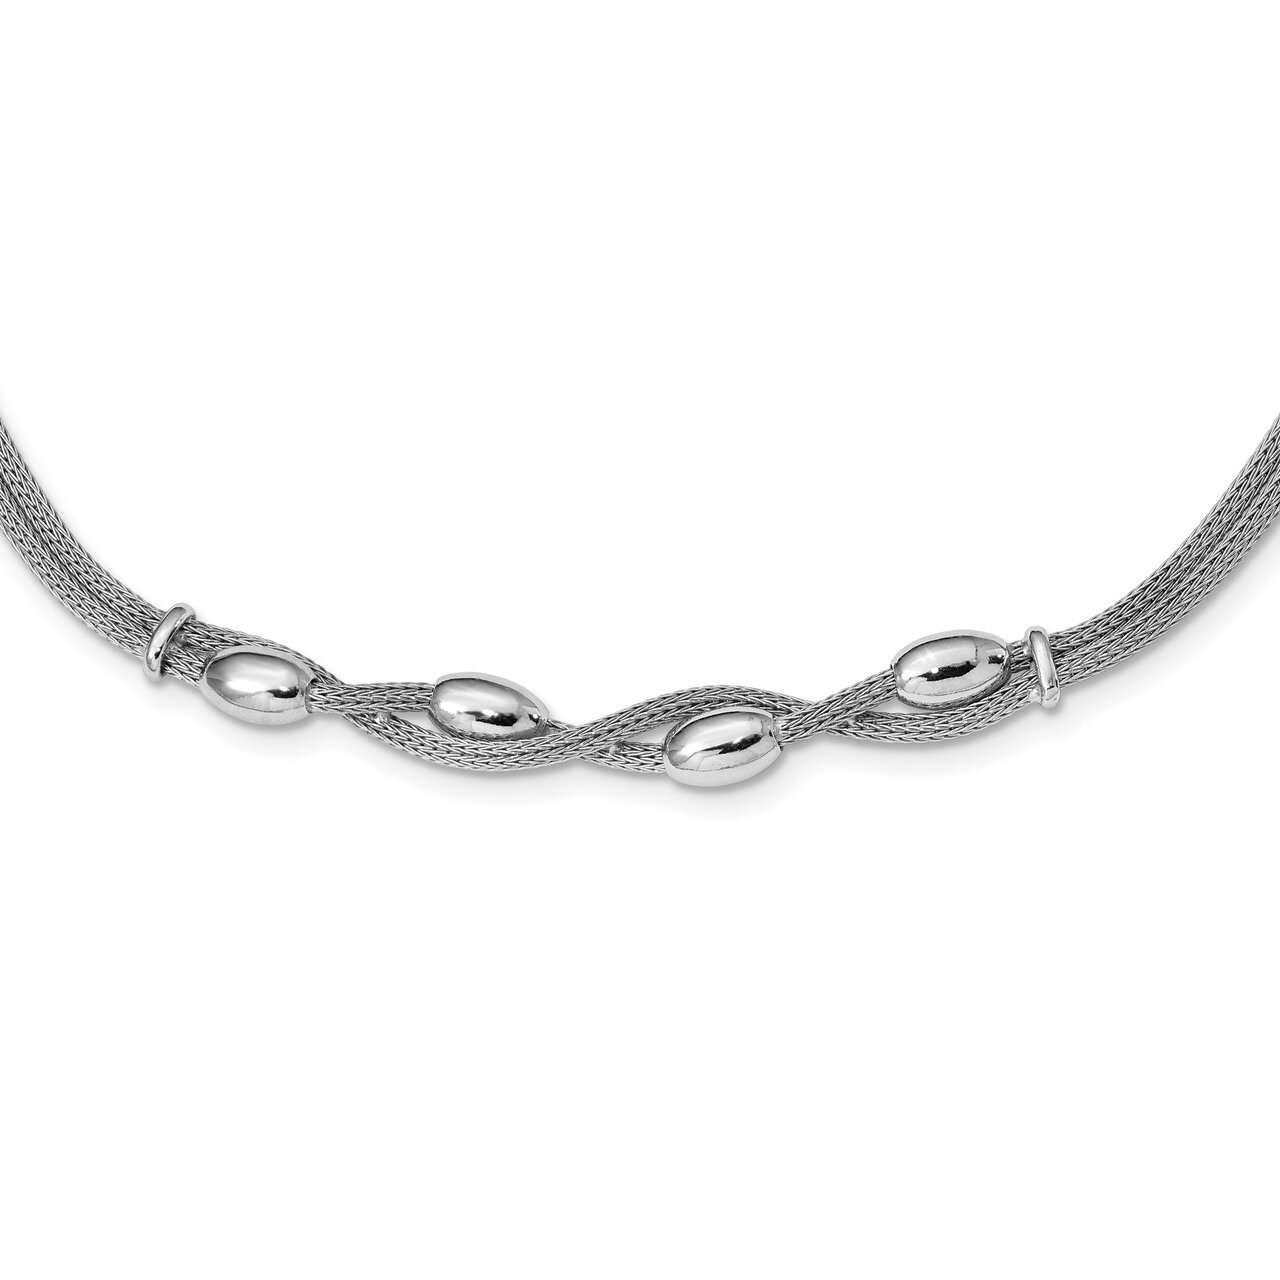 Twisted with 1.25 in ext Necklace 16.5 Inch Sterling Silver Polished HB-QLF883-16.5